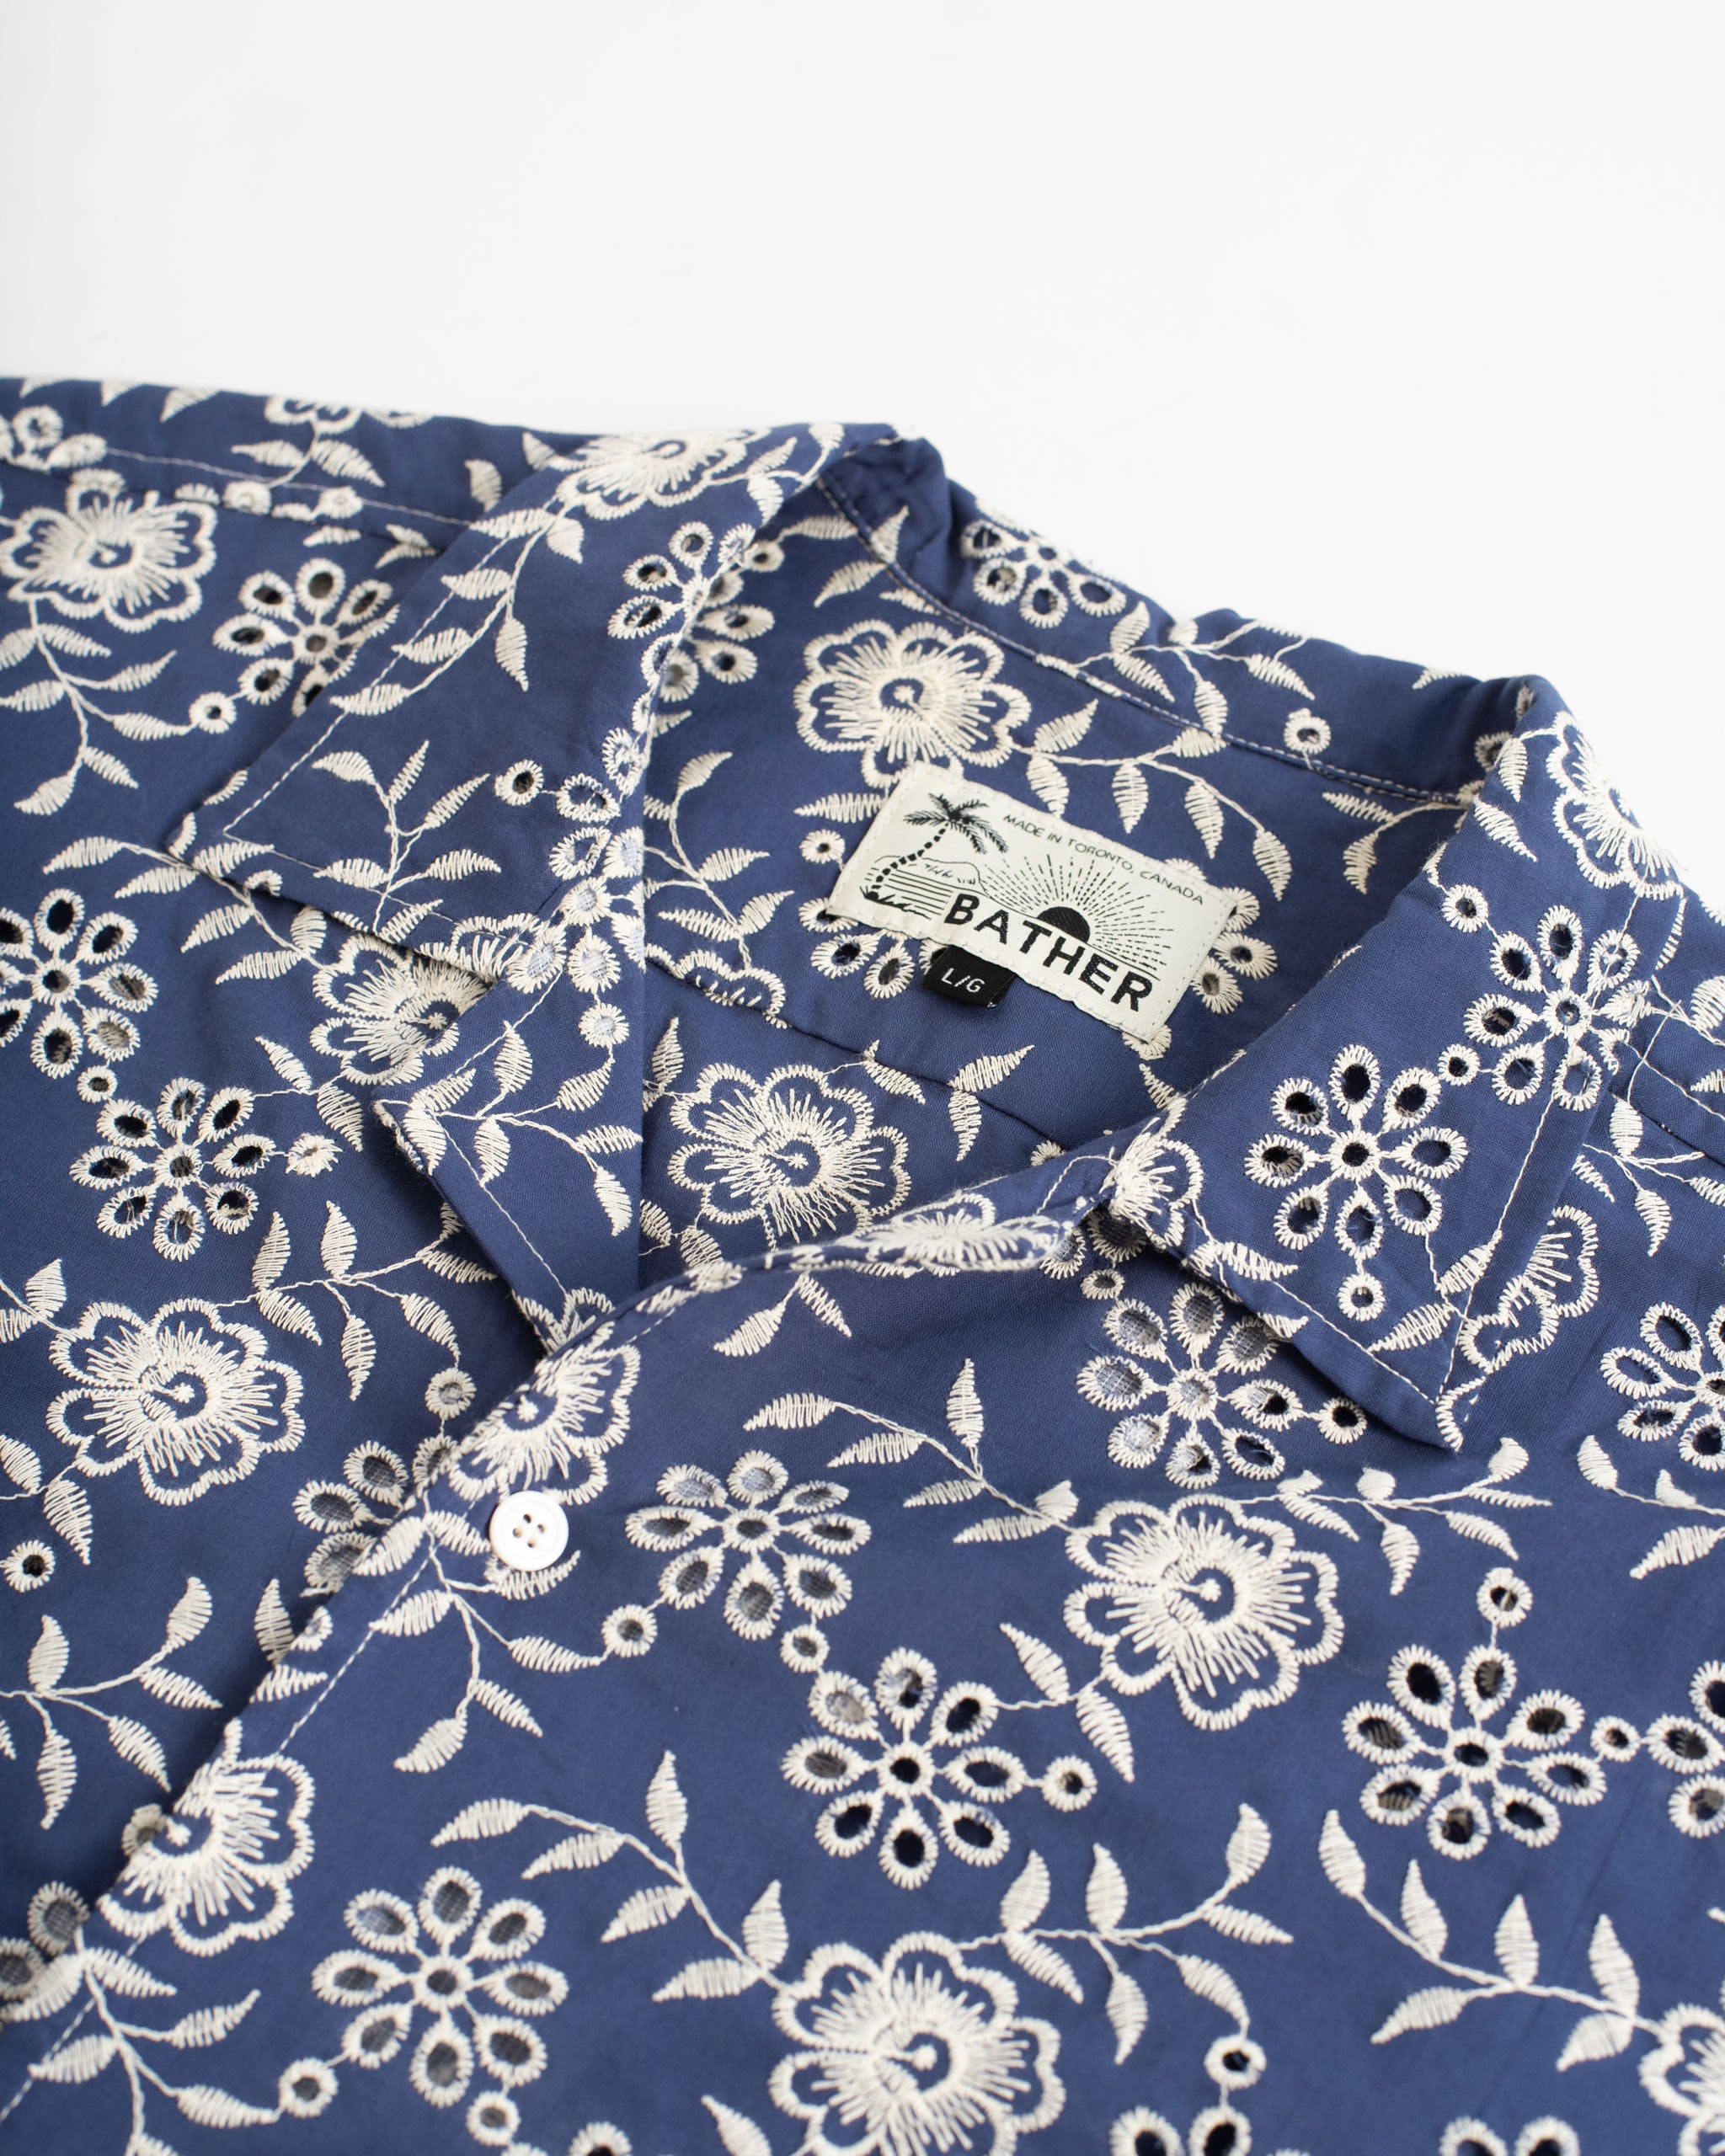 collar close up of Blue camp shirt with an embroidered floral pattern